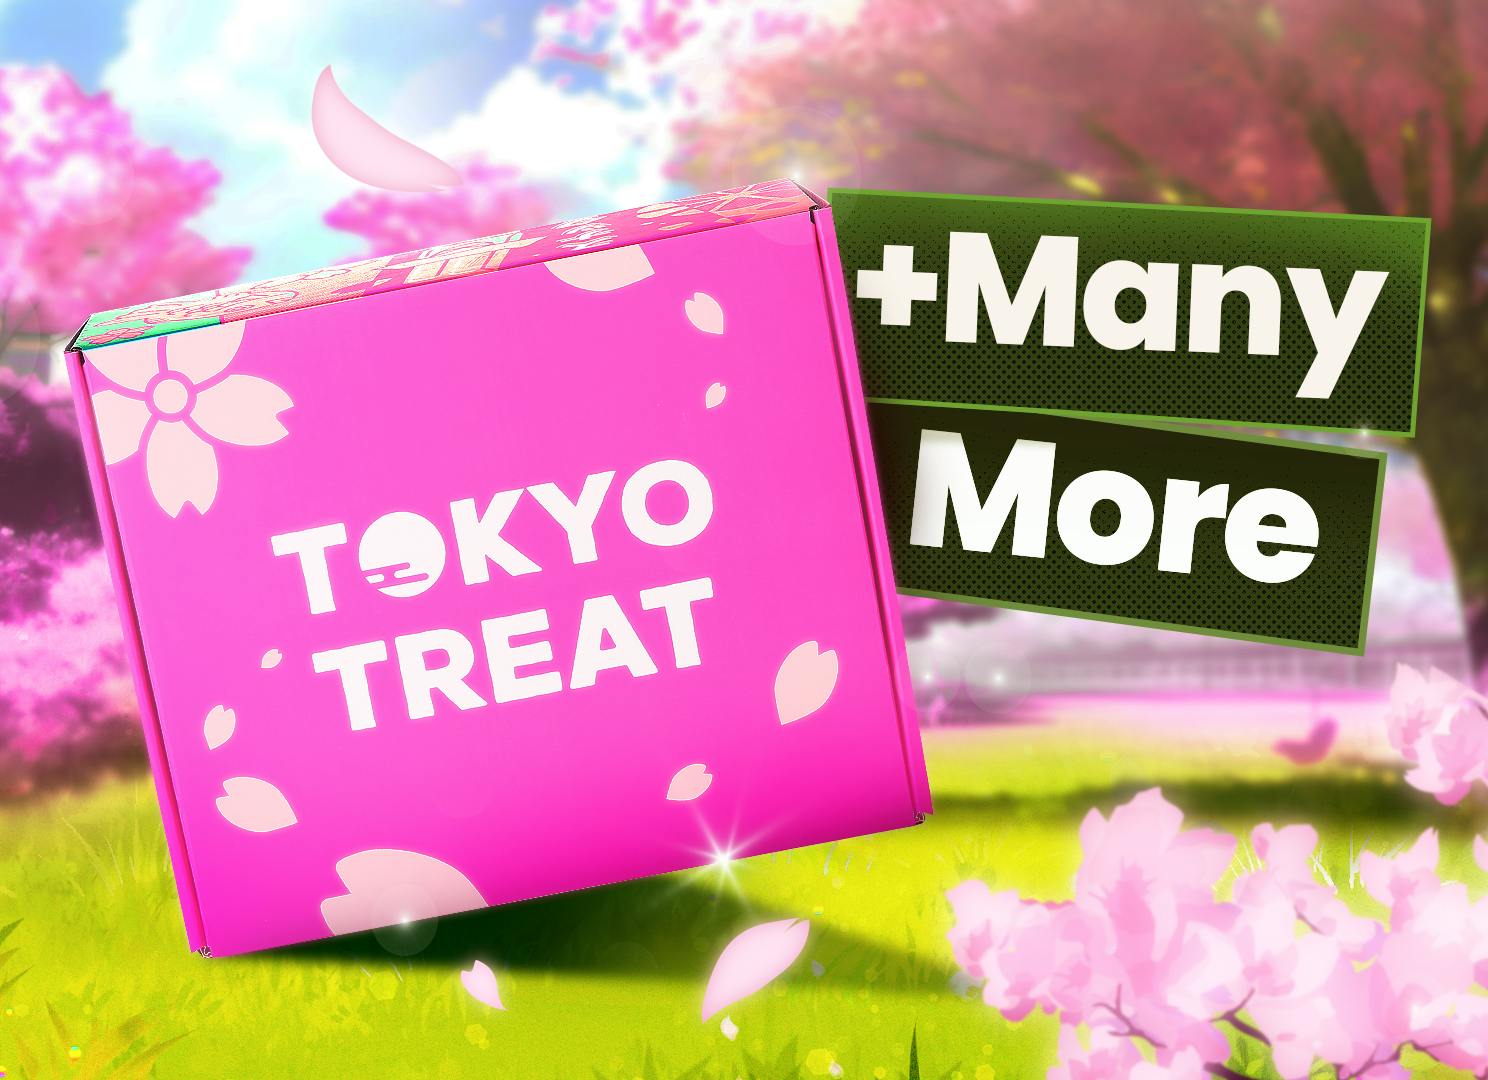 The special-edition TokyoTreat sakura box sits against a park backdrop surrounded by blooming cherry blossoms and a beautiful park.